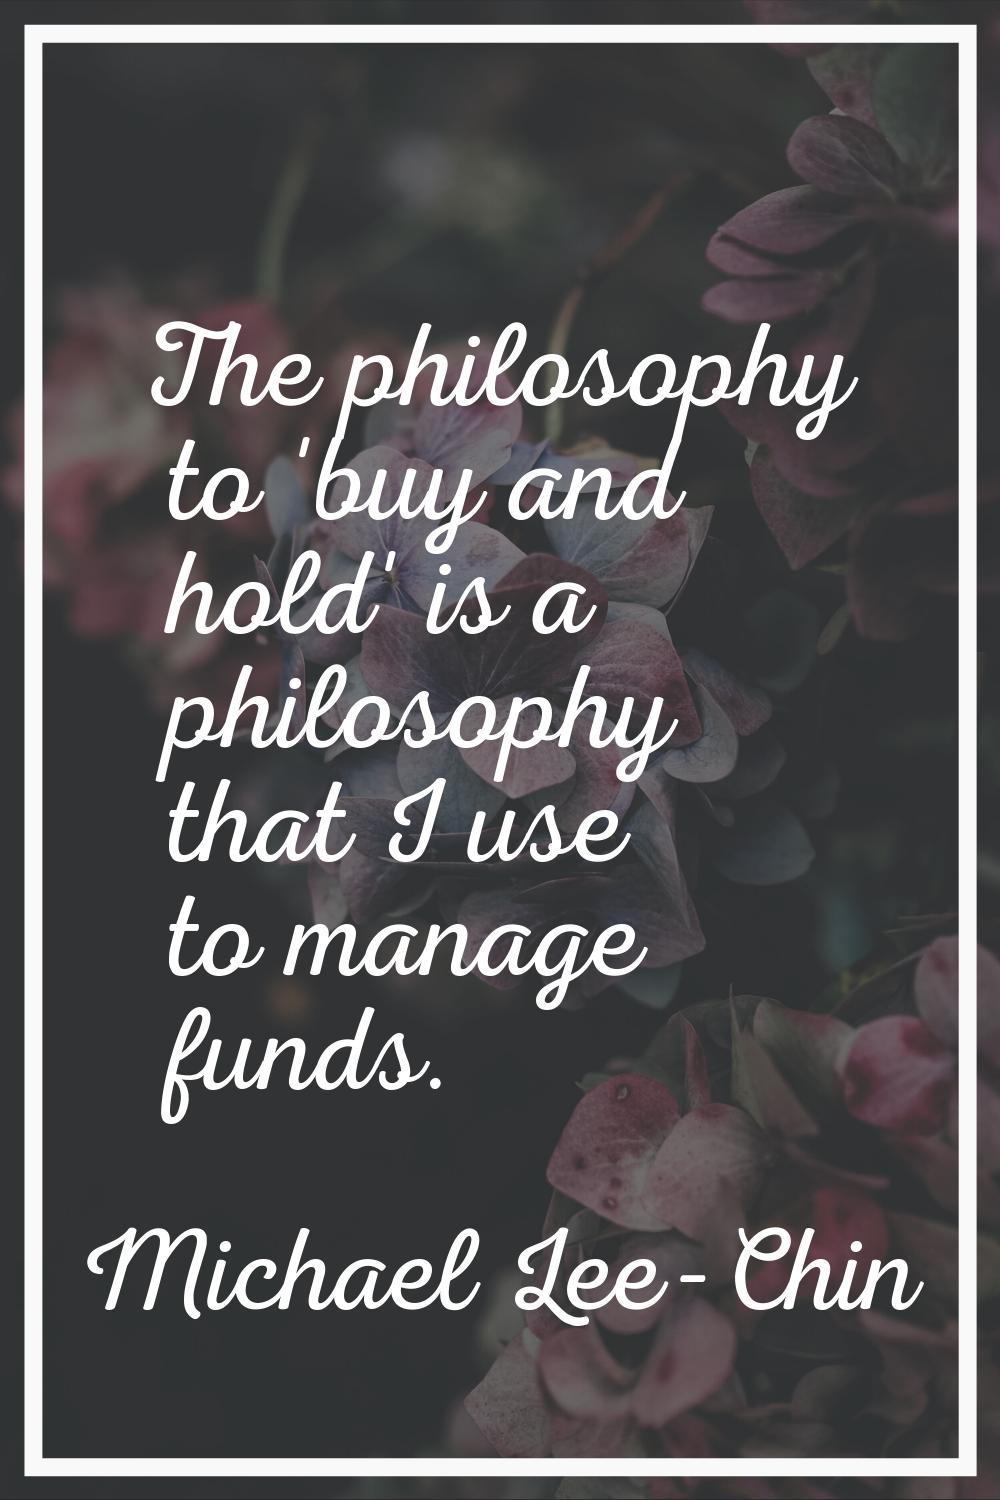 The philosophy to 'buy and hold' is a philosophy that I use to manage funds.